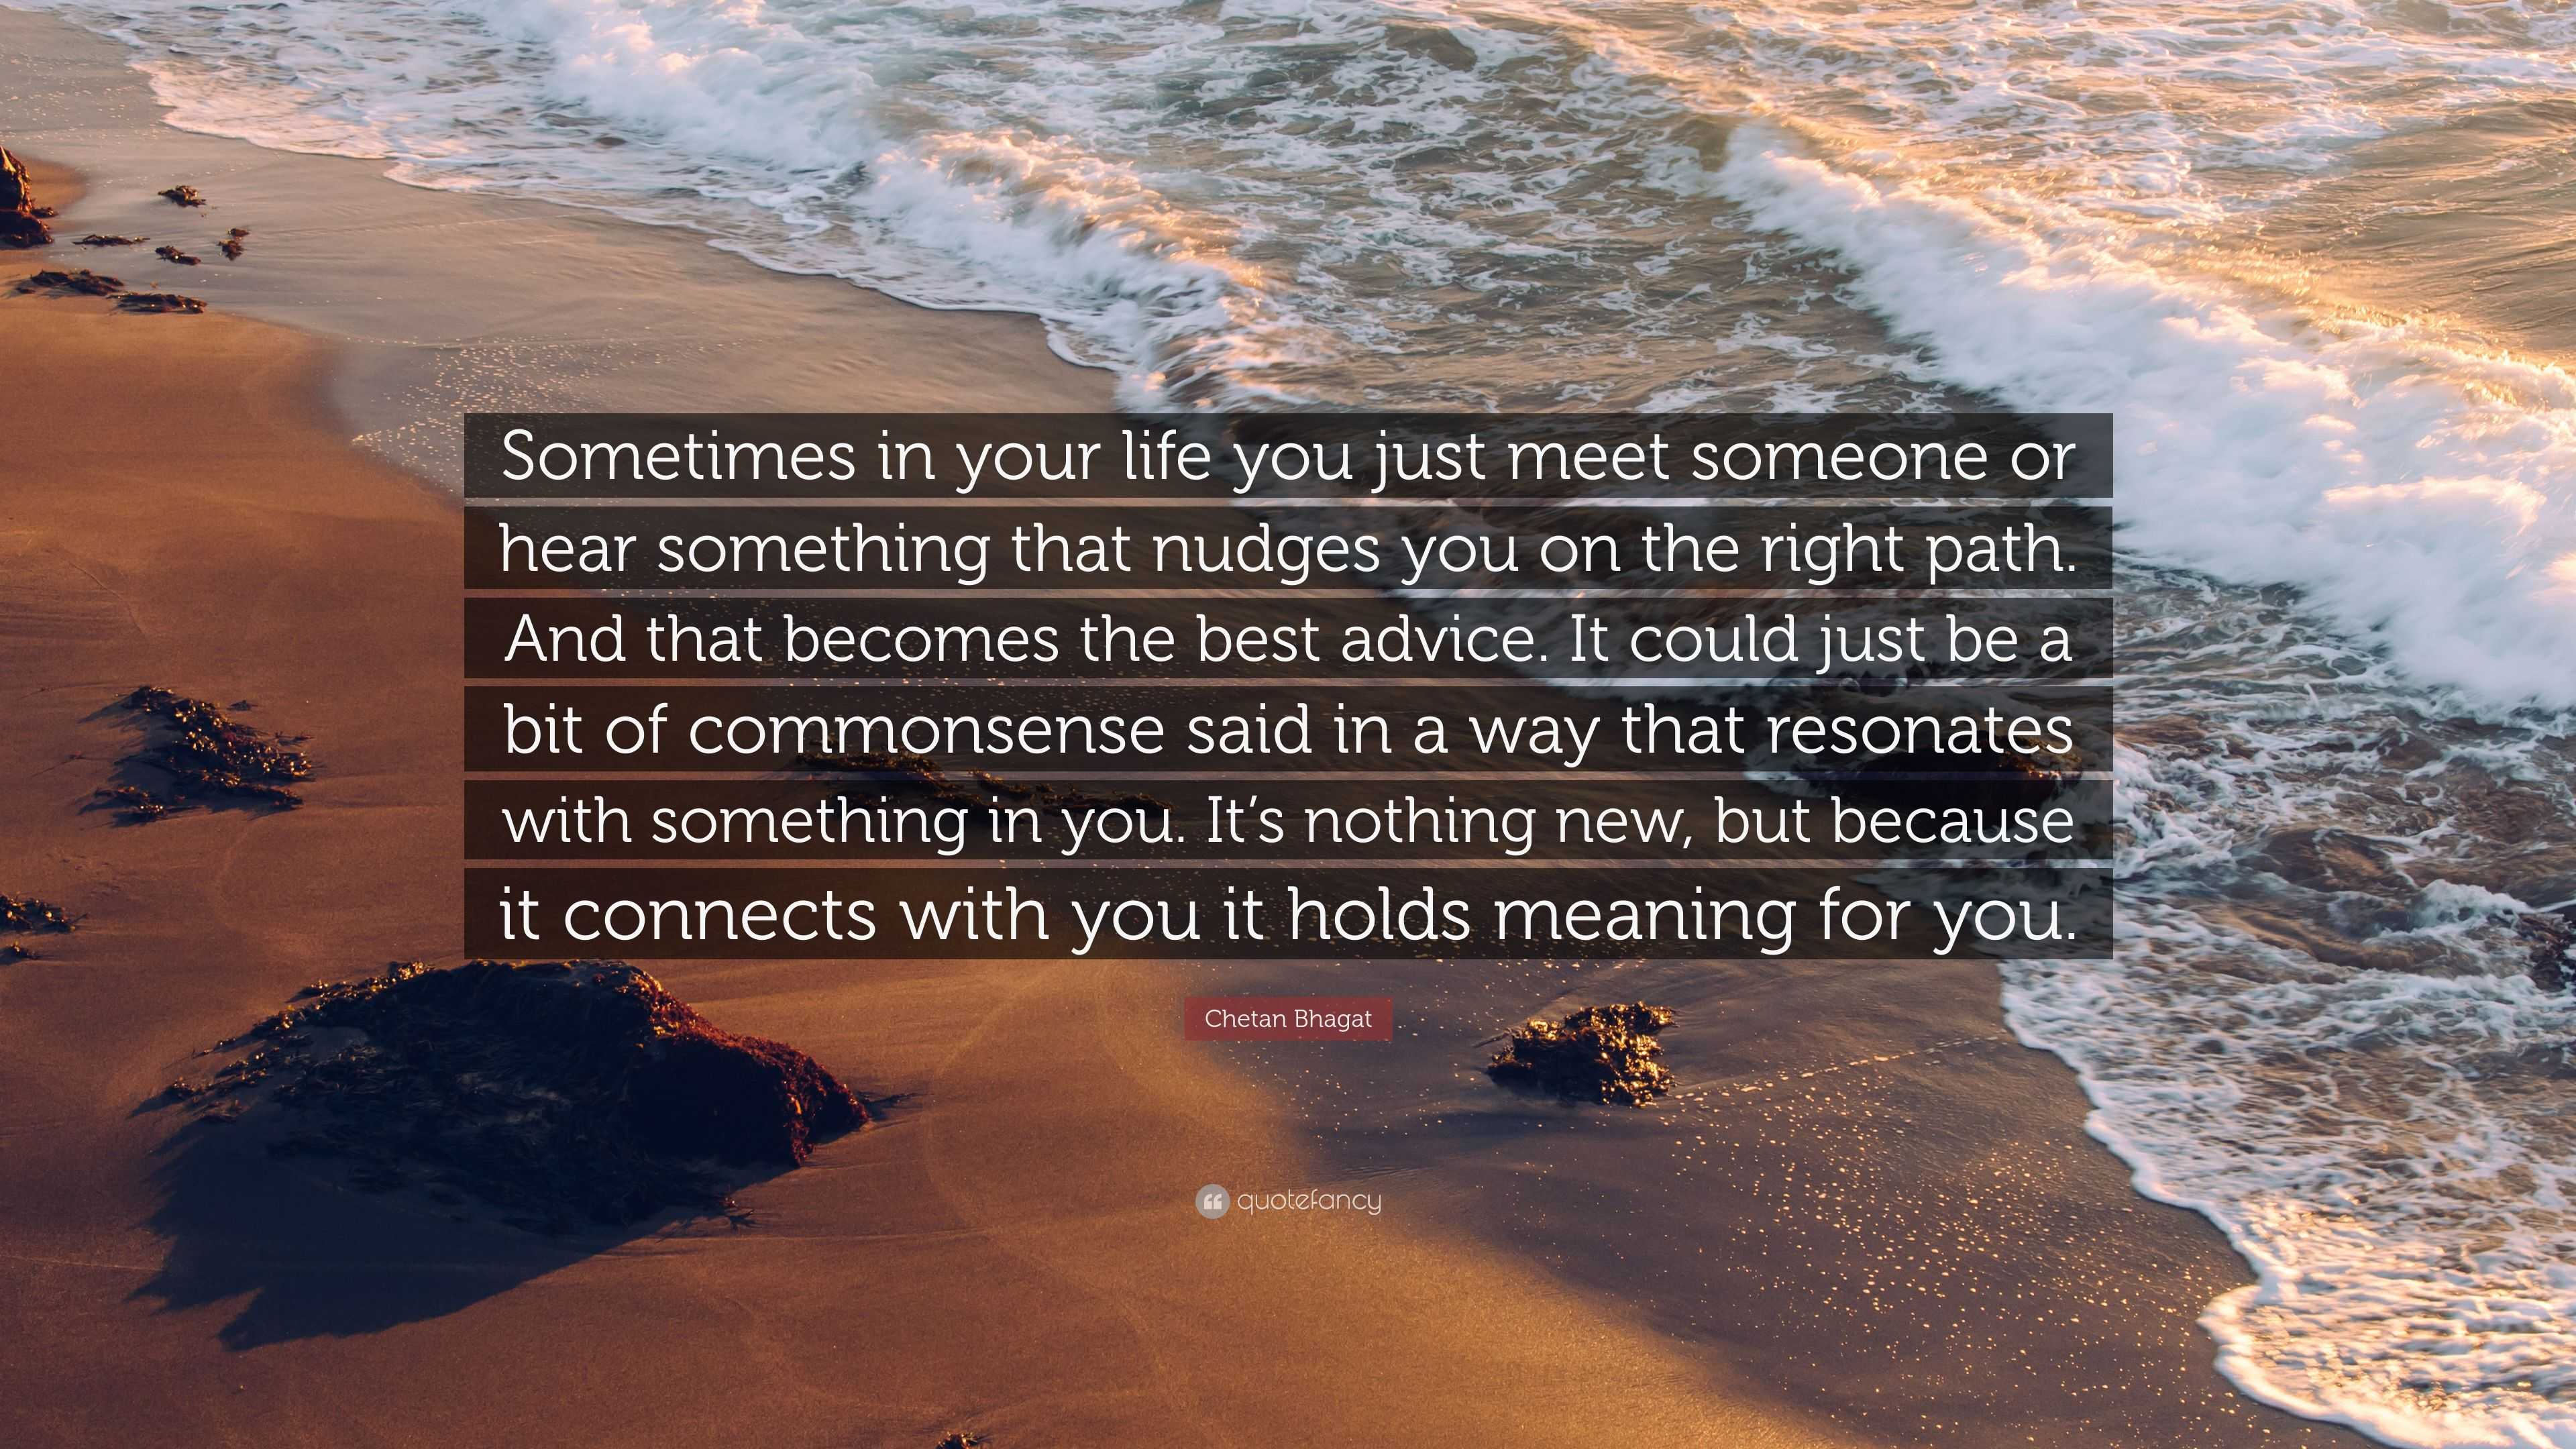 Chetan Bhagat Quote “Sometimes in your life you just meet someone or hear something